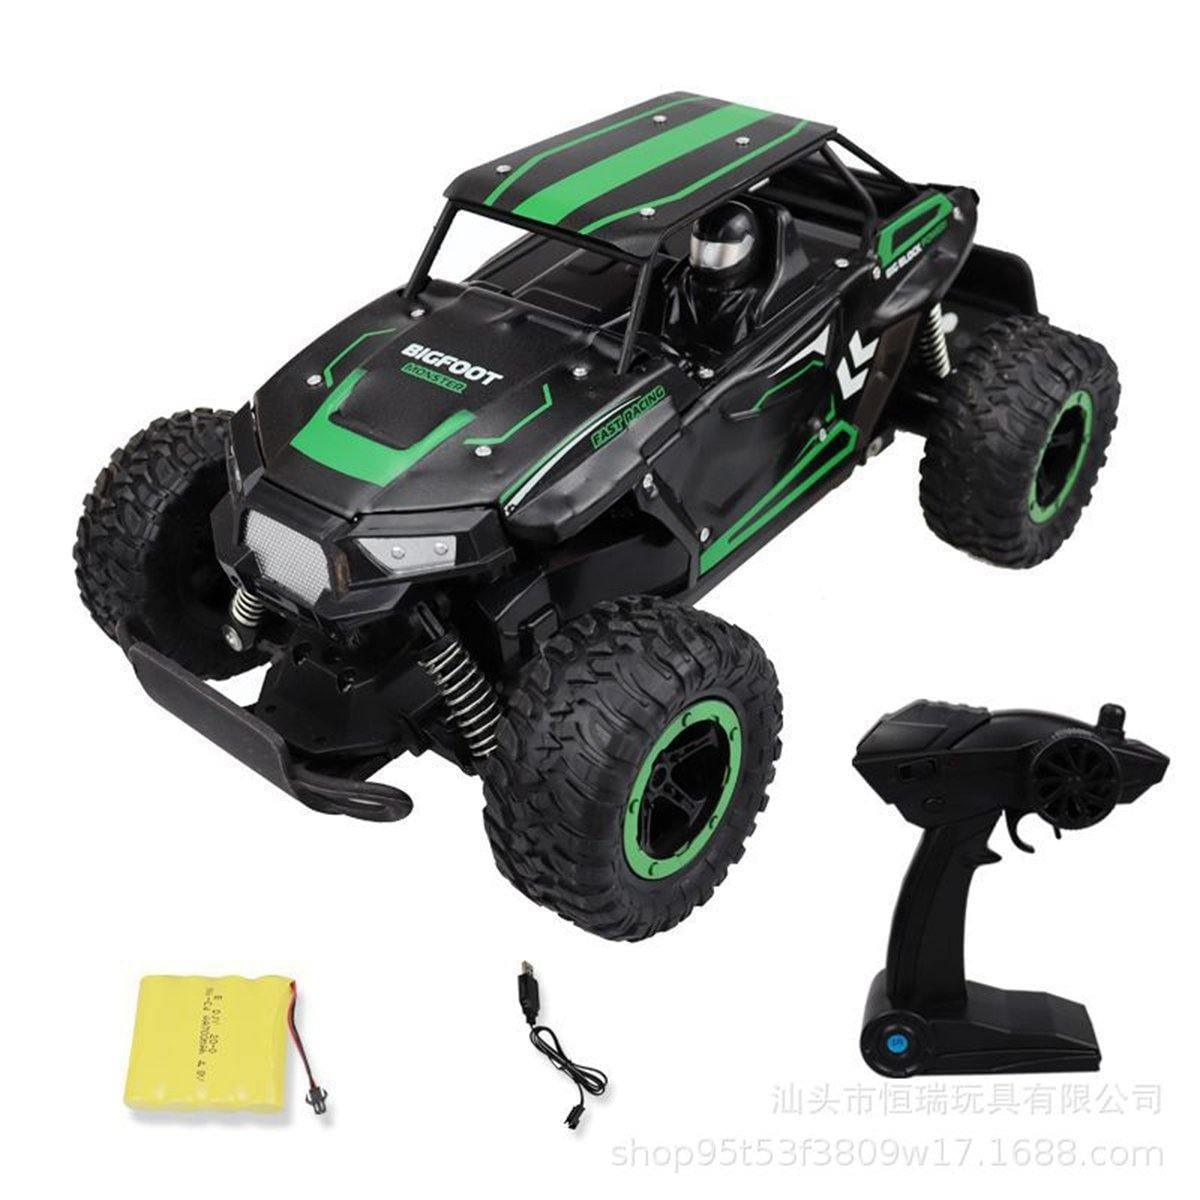 ezy2find remote control toy Green 1/14 2.4G Alloy High Speed RC Car Big Foot Off-road Drift Vehicle Model Indoor Outdoor Toys